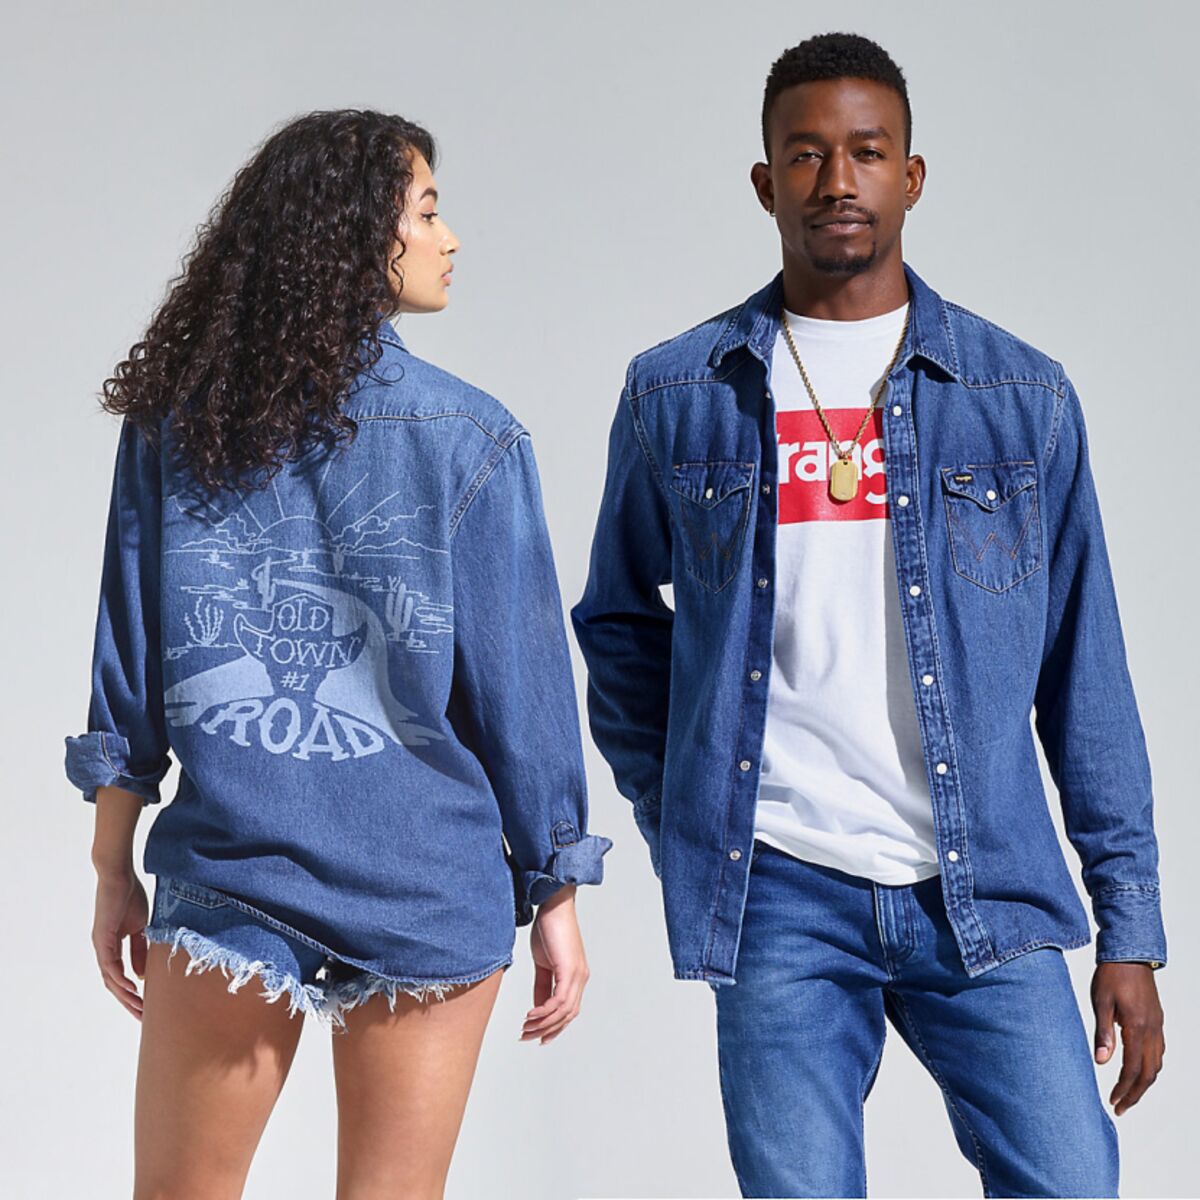 Lil Nas X 'Old Town Road' Song Boosts Wrangler Jeans Brand - Bloomberg